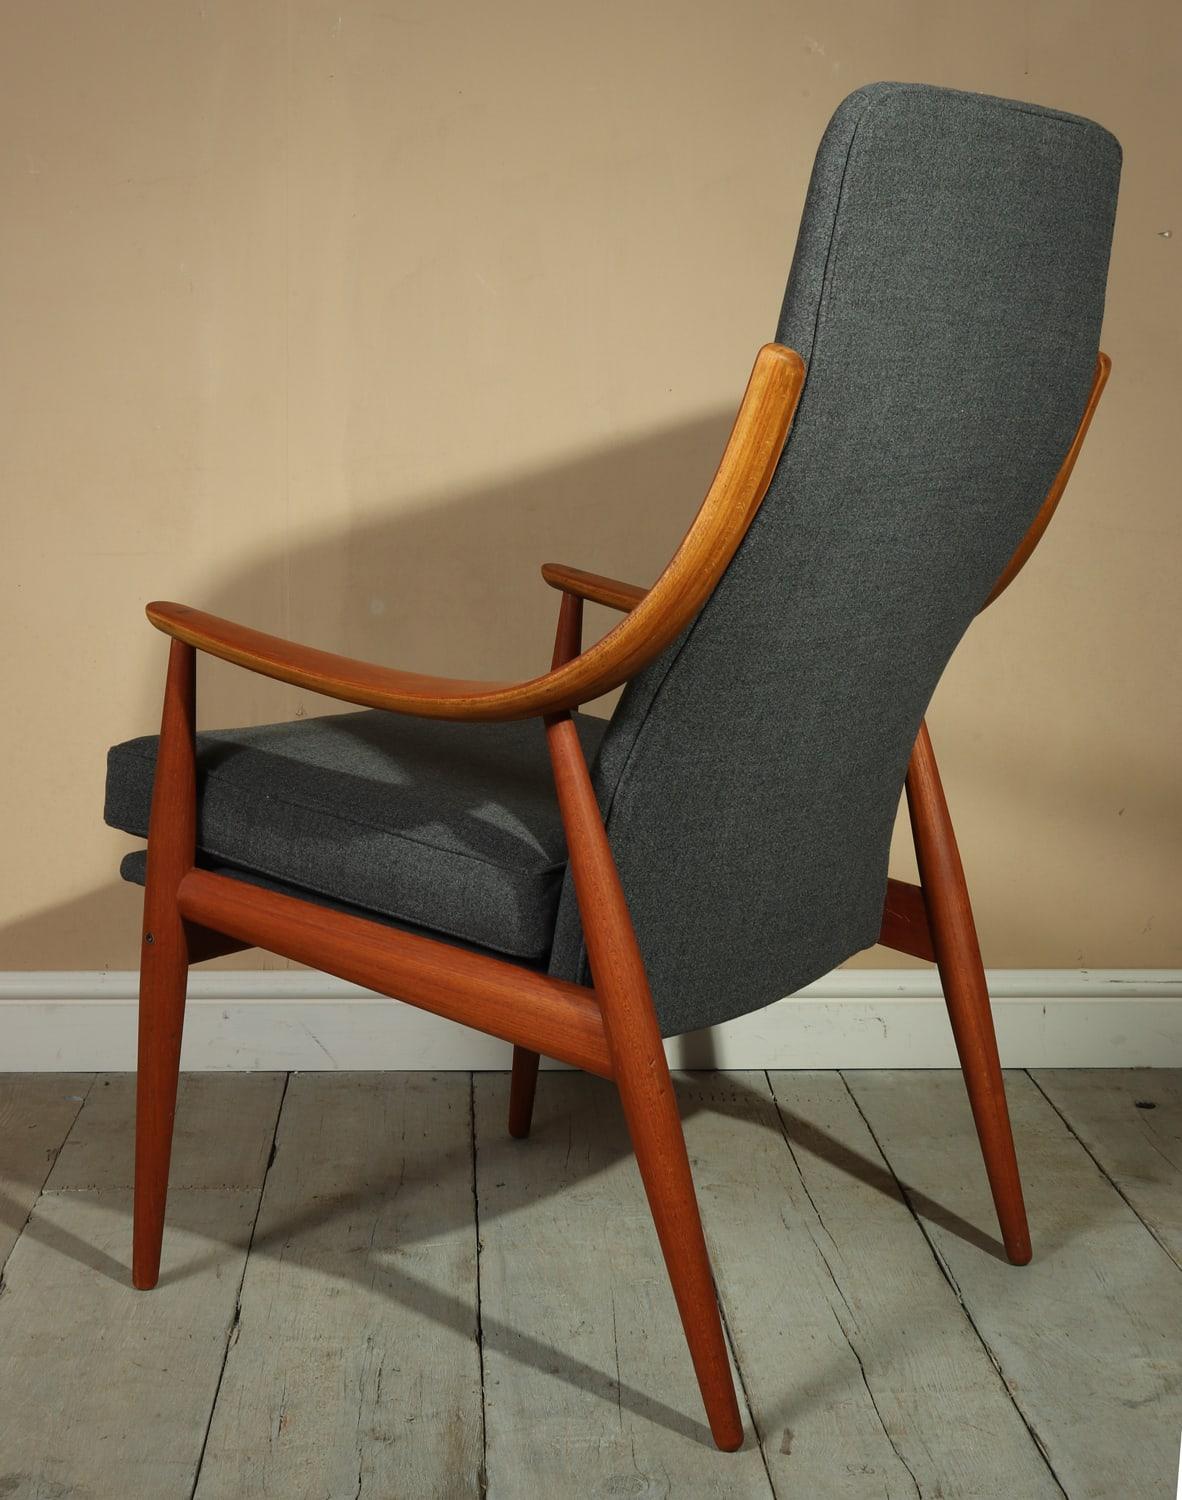 Teak Chair Model 148 by Peter Hvidt Fo France and SonTeak Chair Model 148 In Excellent Condition For Sale In Paddock Wood, Kent